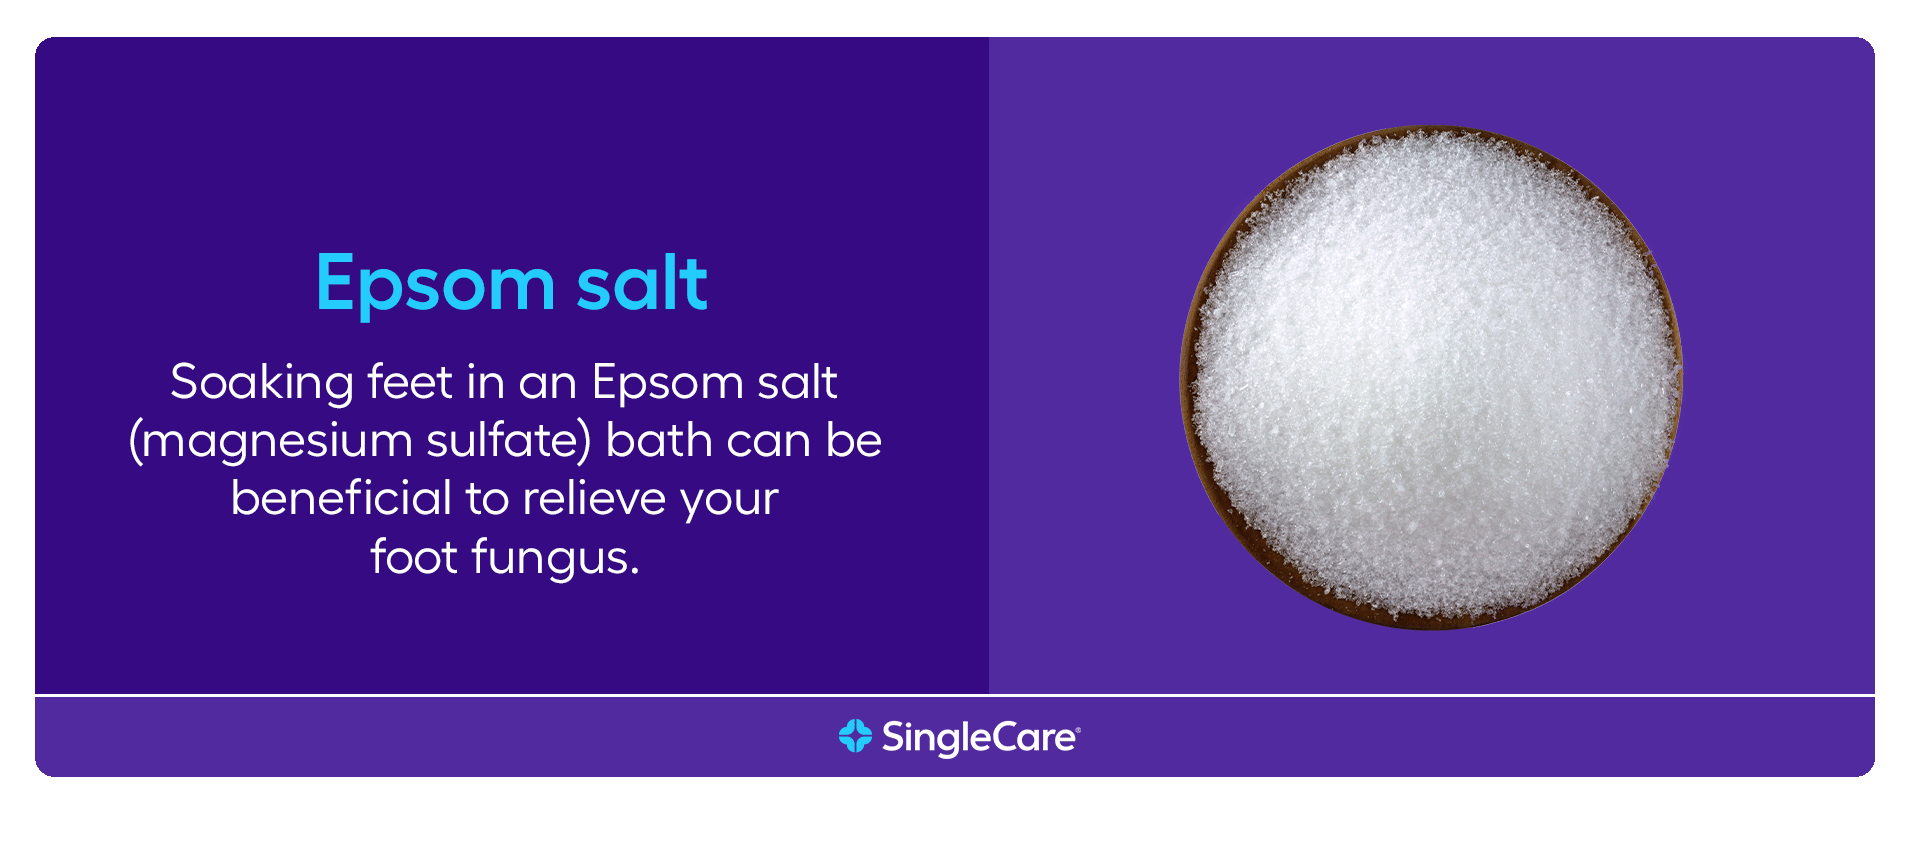 7 Benefits Of Epsom Salt, How It Works, And Side Effects